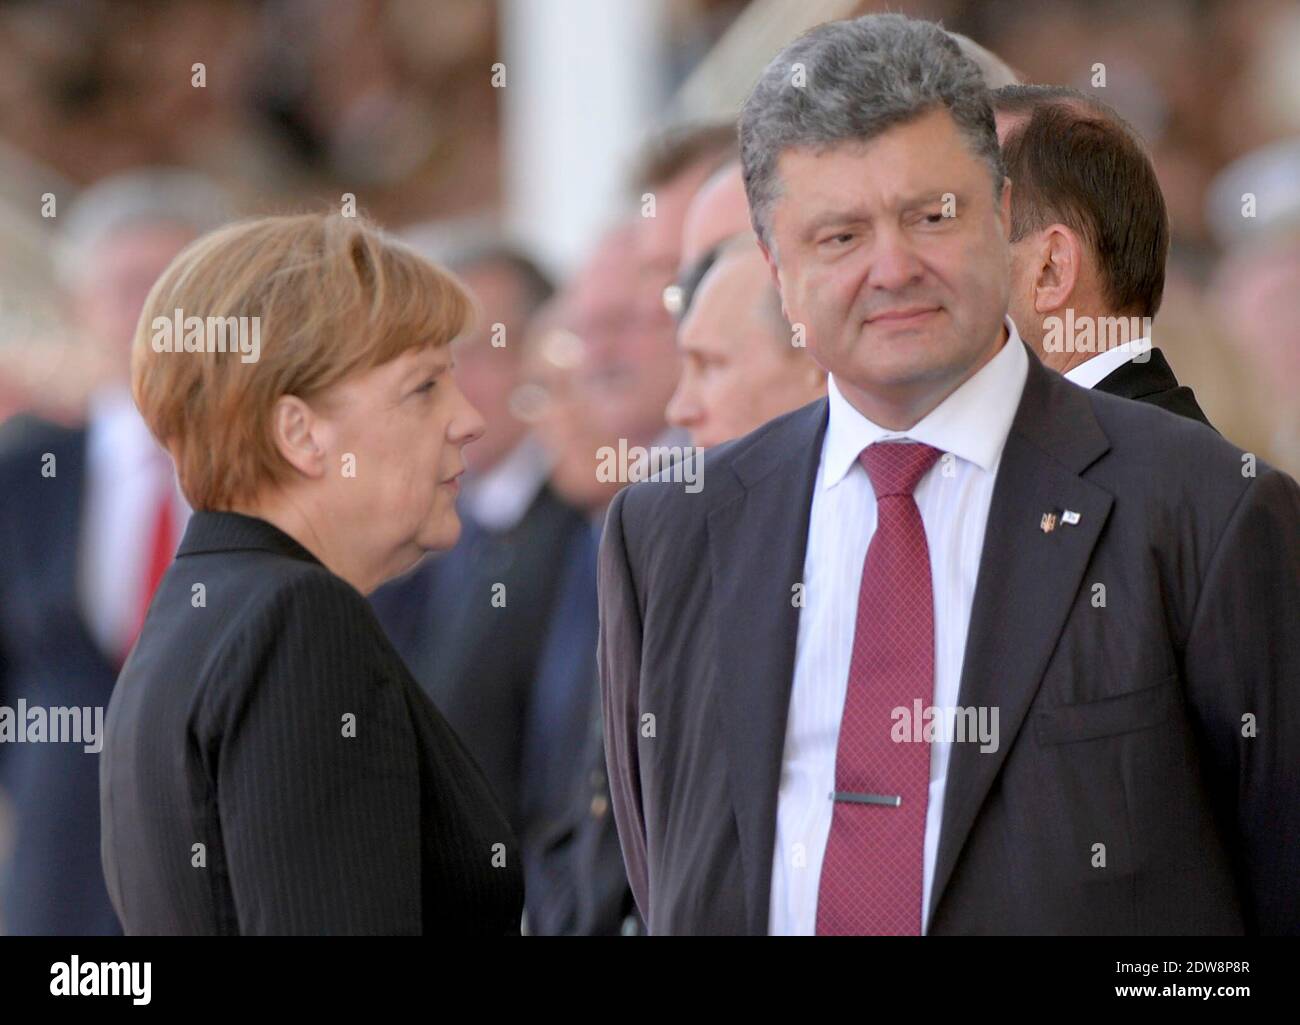 German Chancellor Angela Merkel and President of Ukraine, Petro Oleksiyovytch Porochenko attend the International Ceremony at Sword Beach in Ouistreham, as part of the official ceremonies on the occasion of the D-Day 70th Anniversary, on June 6, 2014 in Normandy, France. Photo by Abd Rabbo-Bernard-Gouhier-Mousse/ABACAPRESS.COM Stock Photo